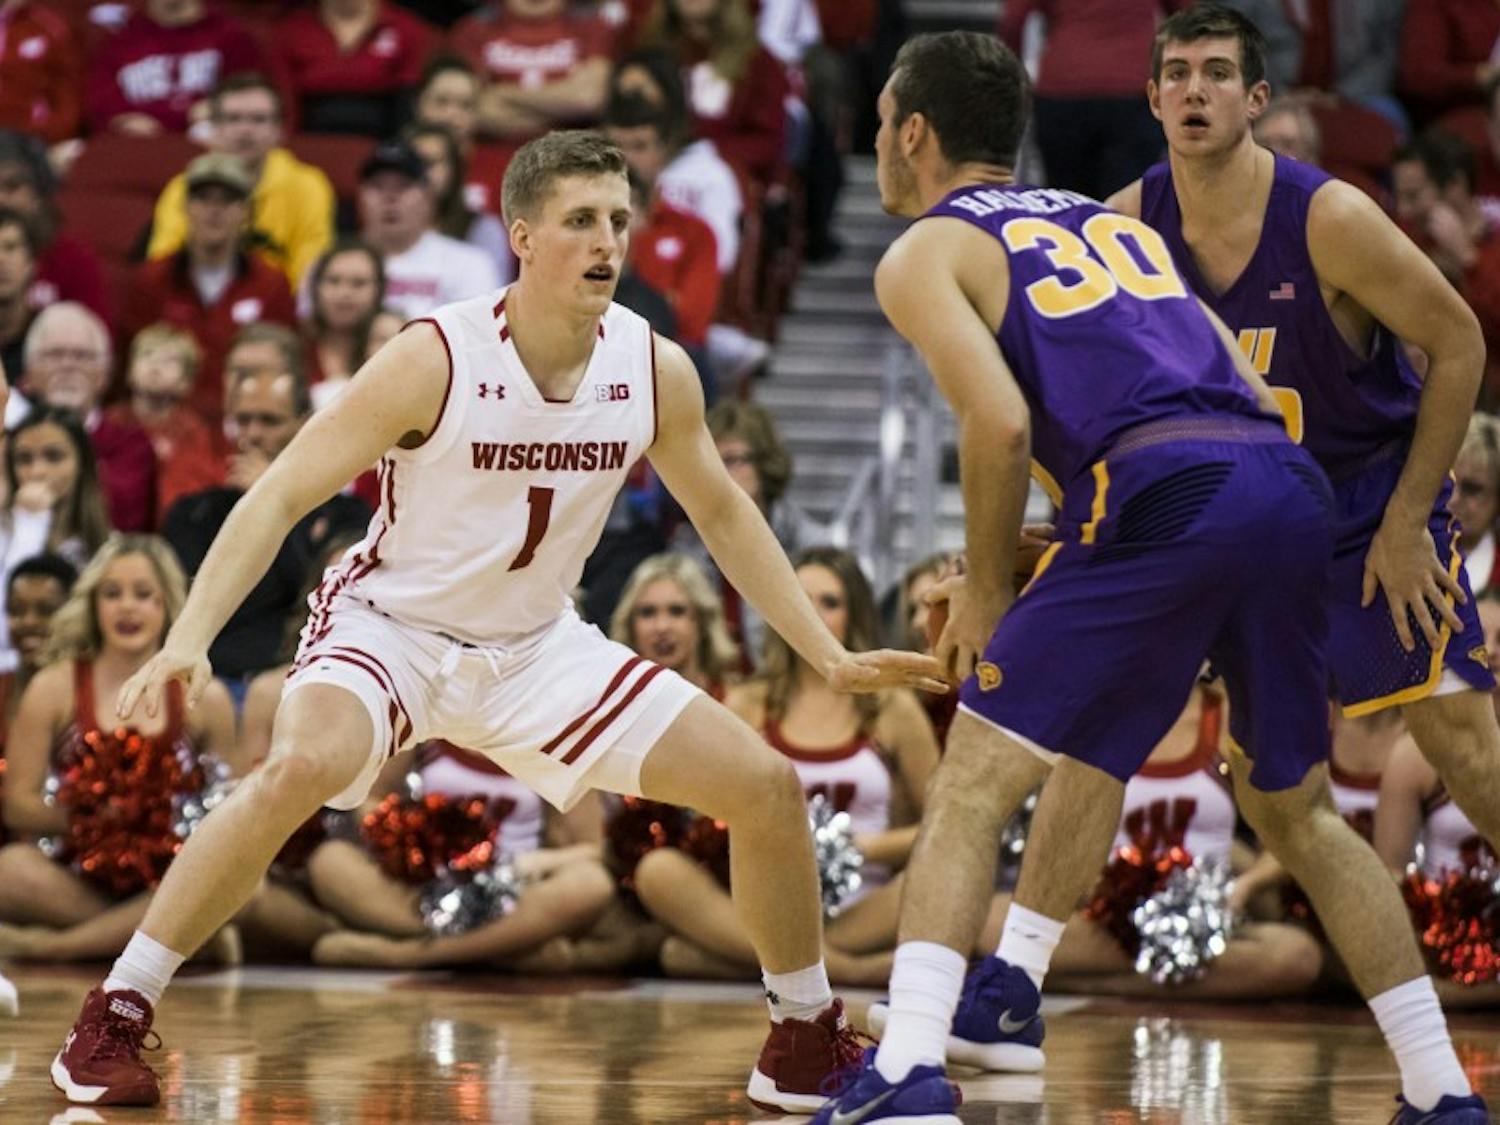 Junior guard Brevin Pritzl led the Badgers with 17 points and hit multiple huge three-pointers in the second half.